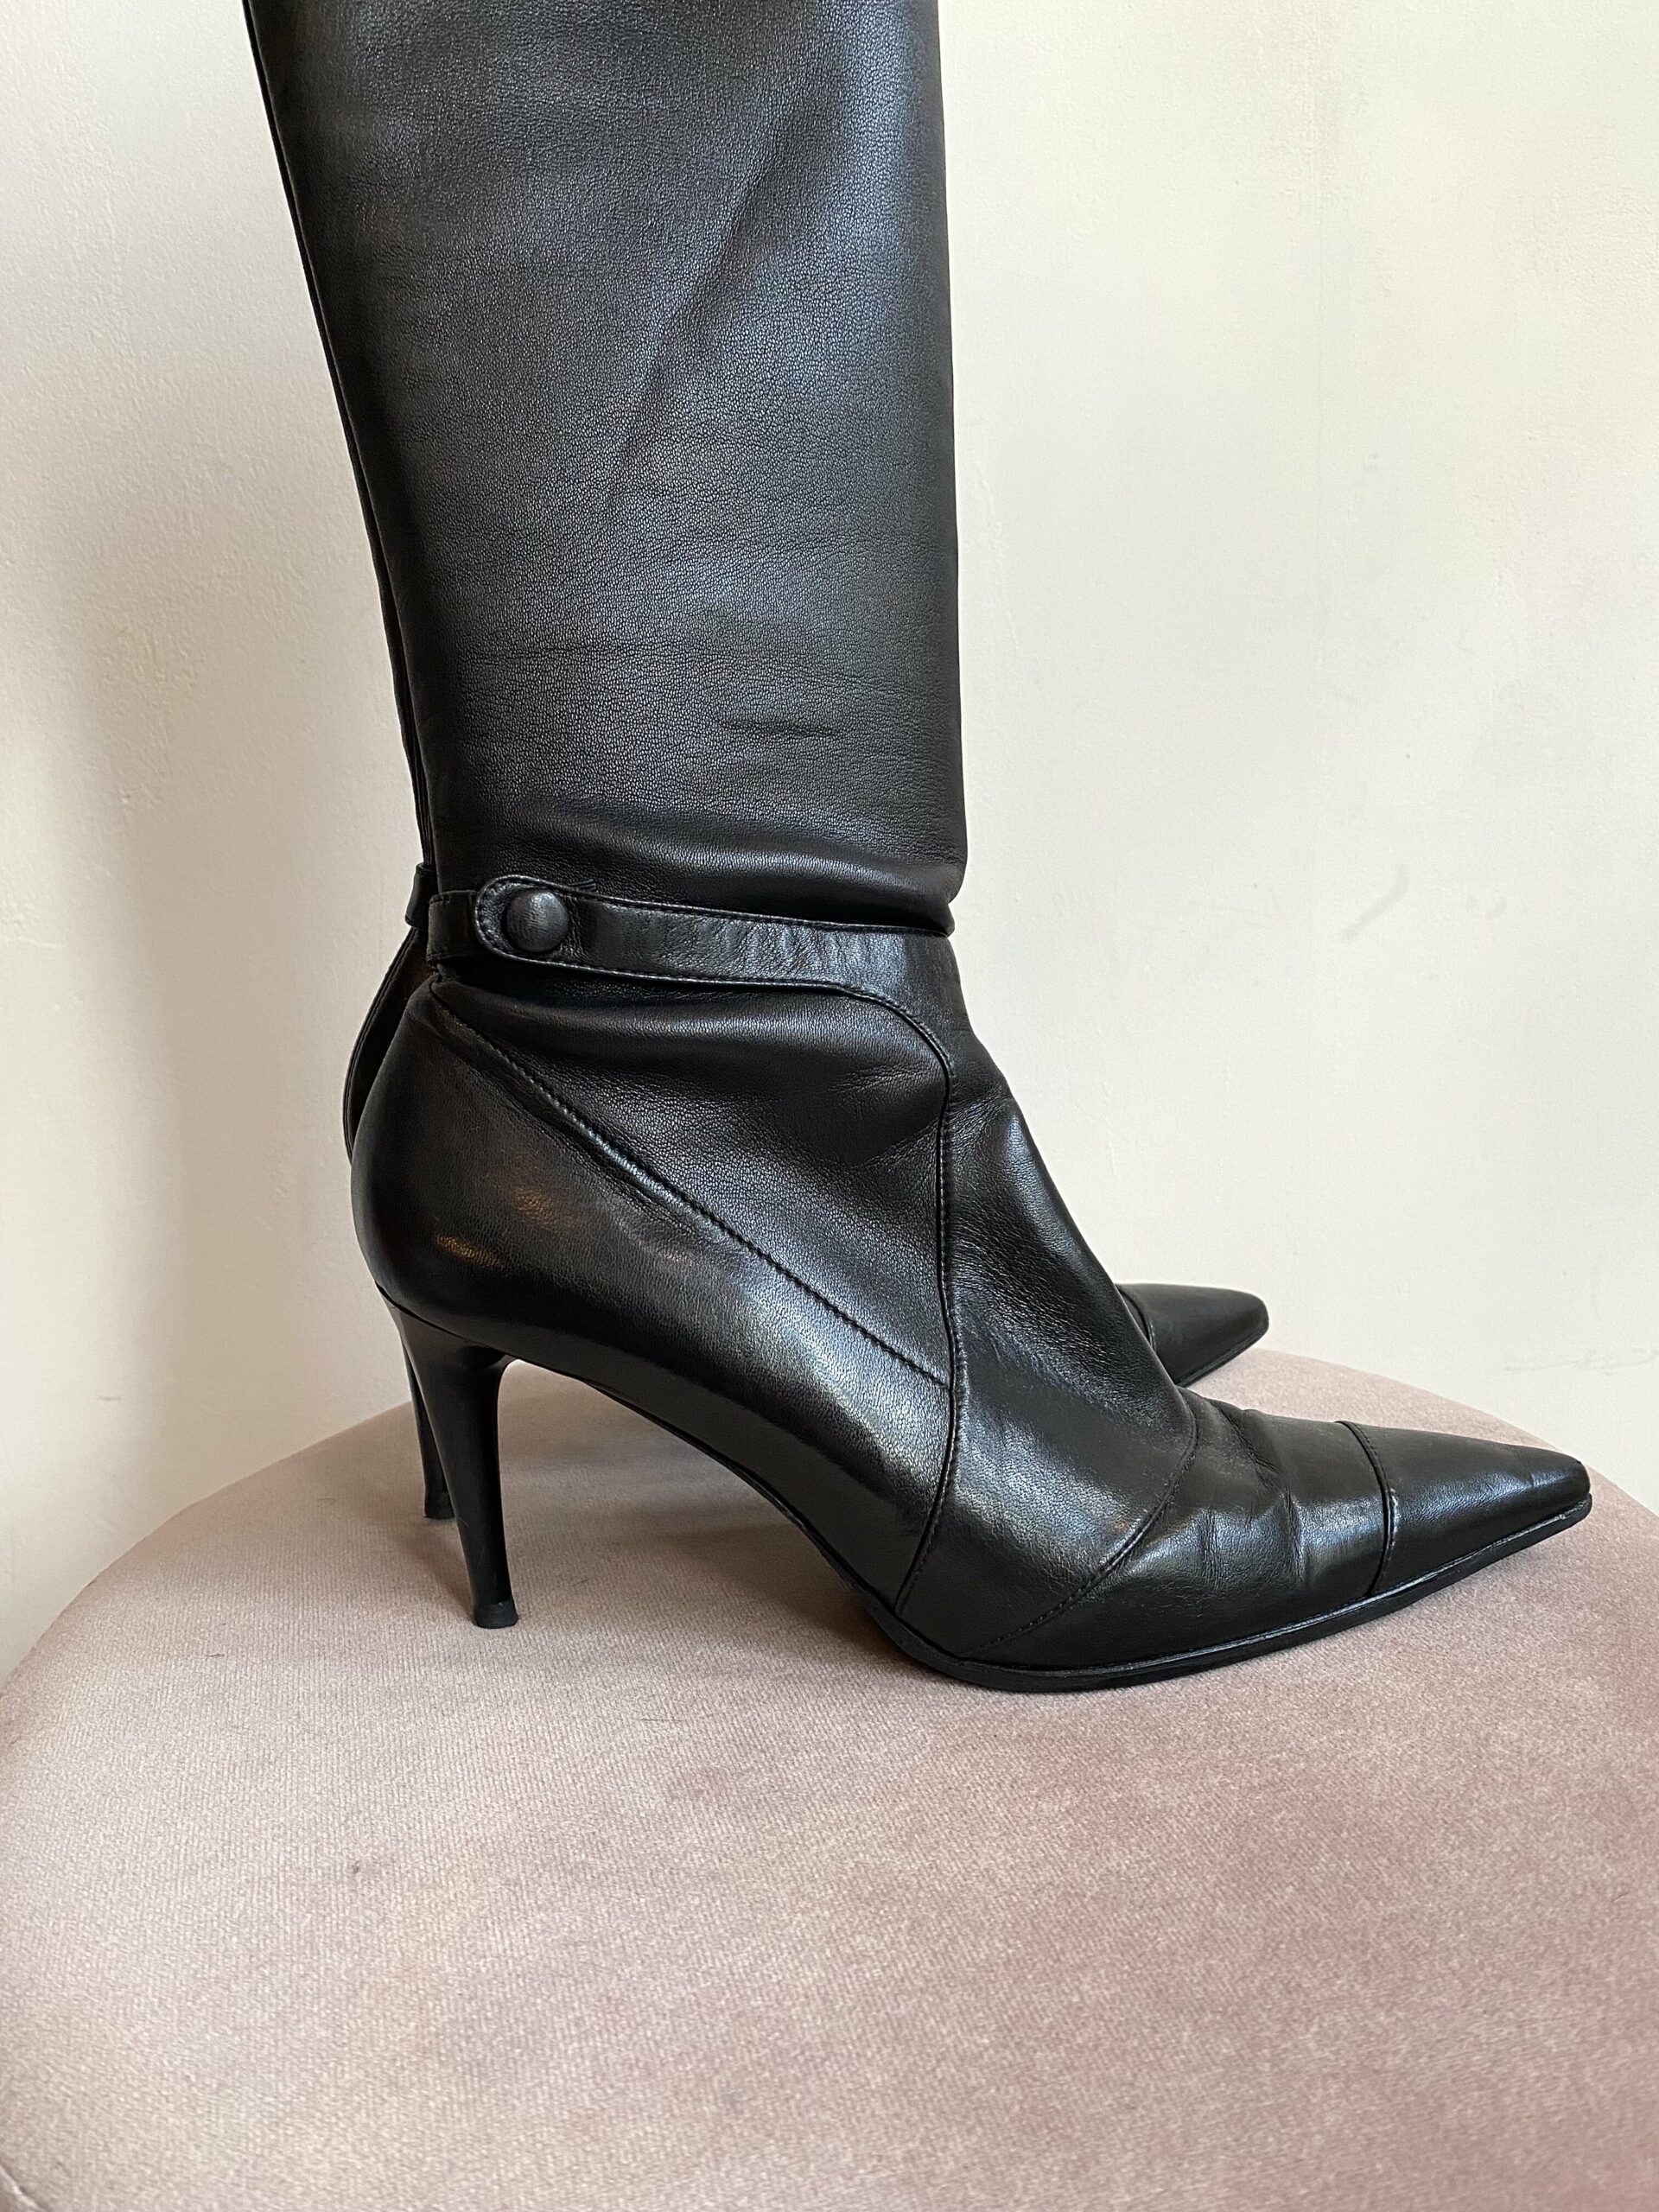 Chanel Black Leather High Overknee Boots Size 38 ½ – Luxeparel